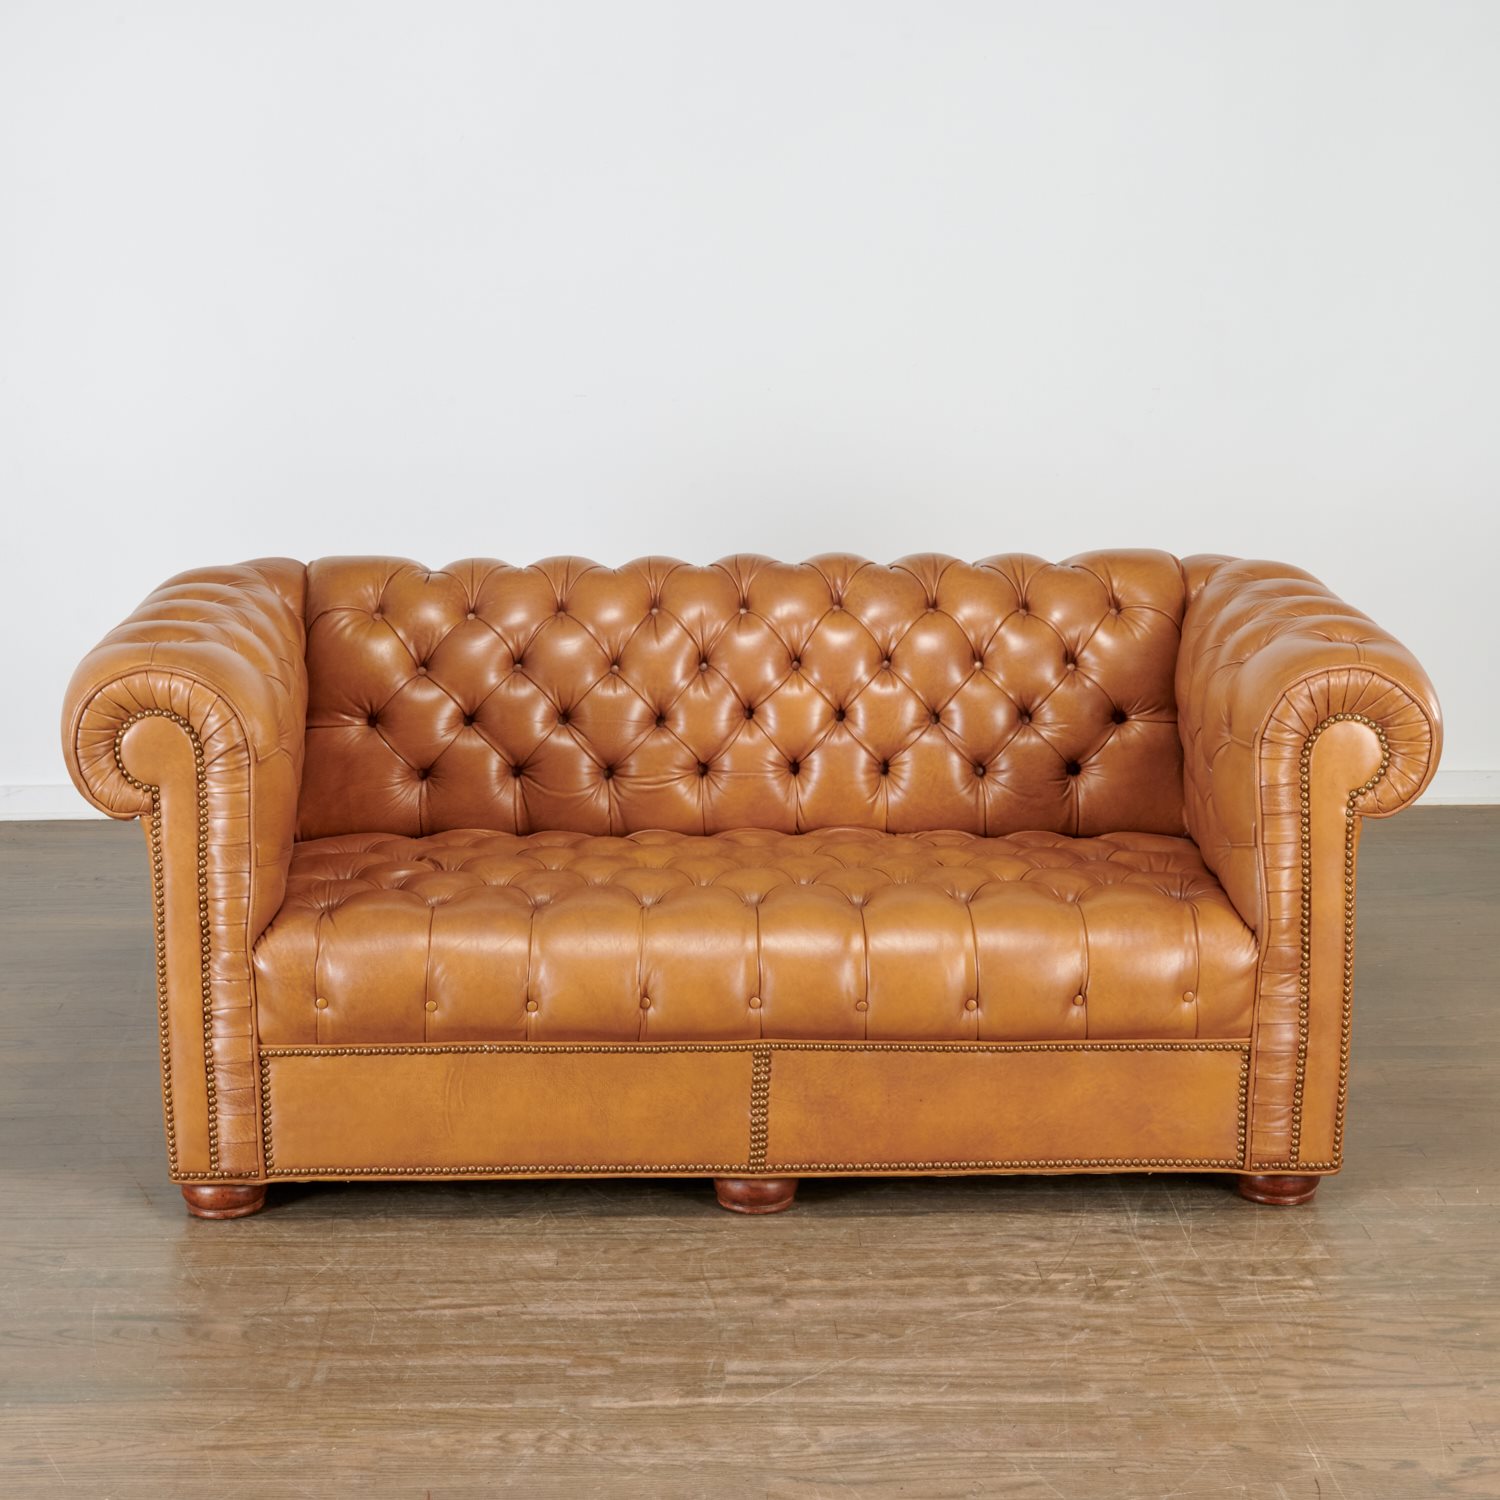 NICE QUALITY LEATHER CHESTERFIELD